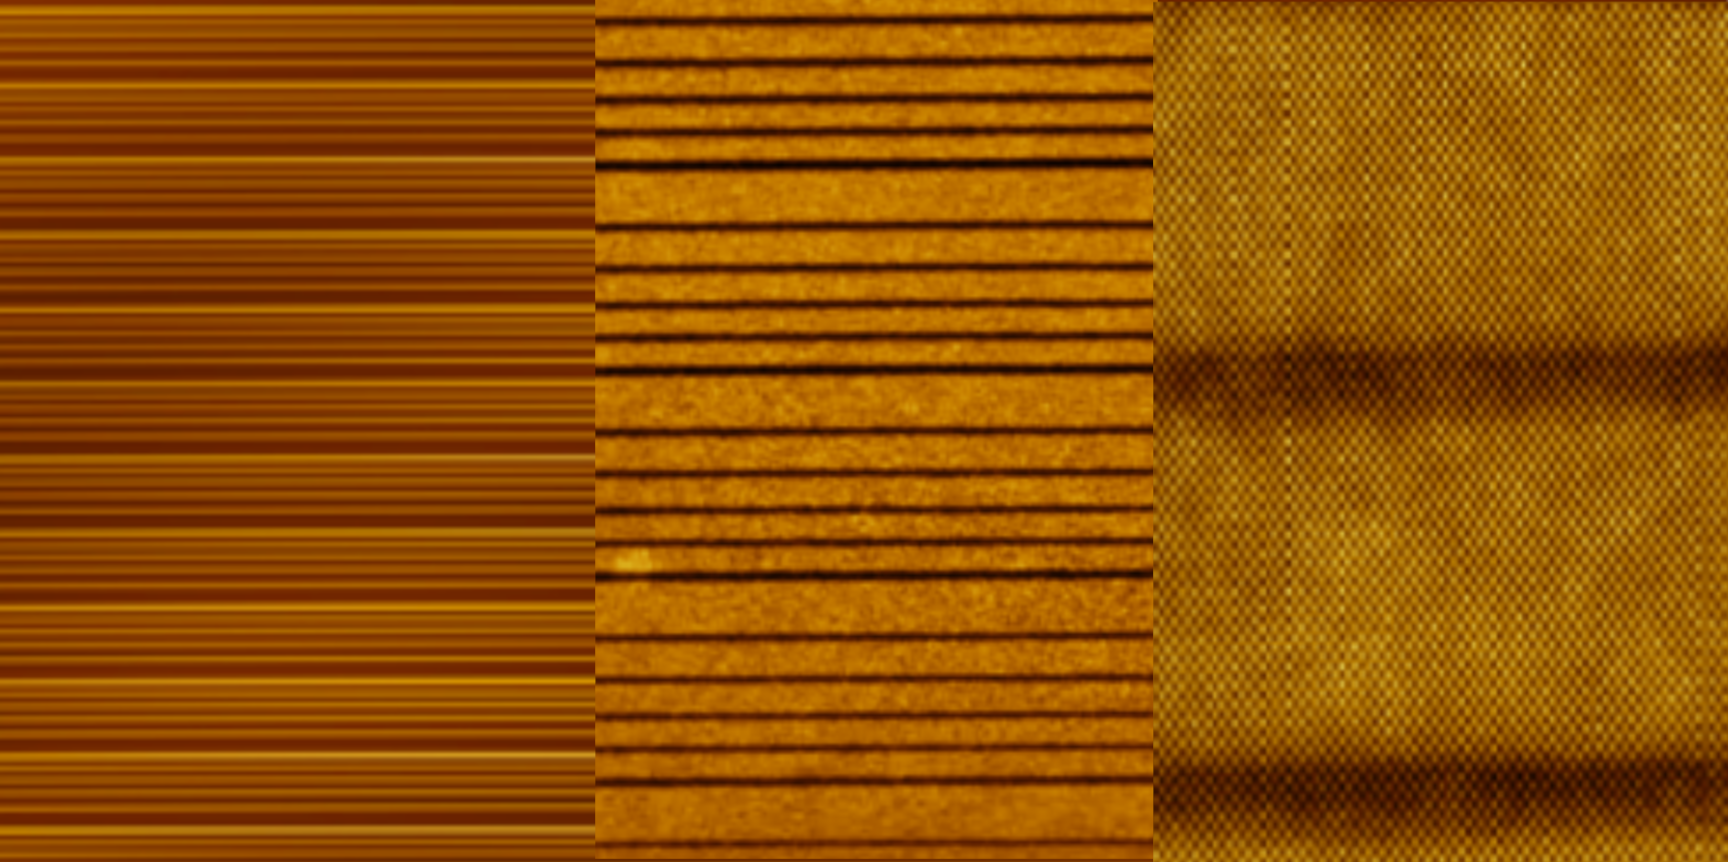 STEM image of one of the Ge/SiGe heterostructures